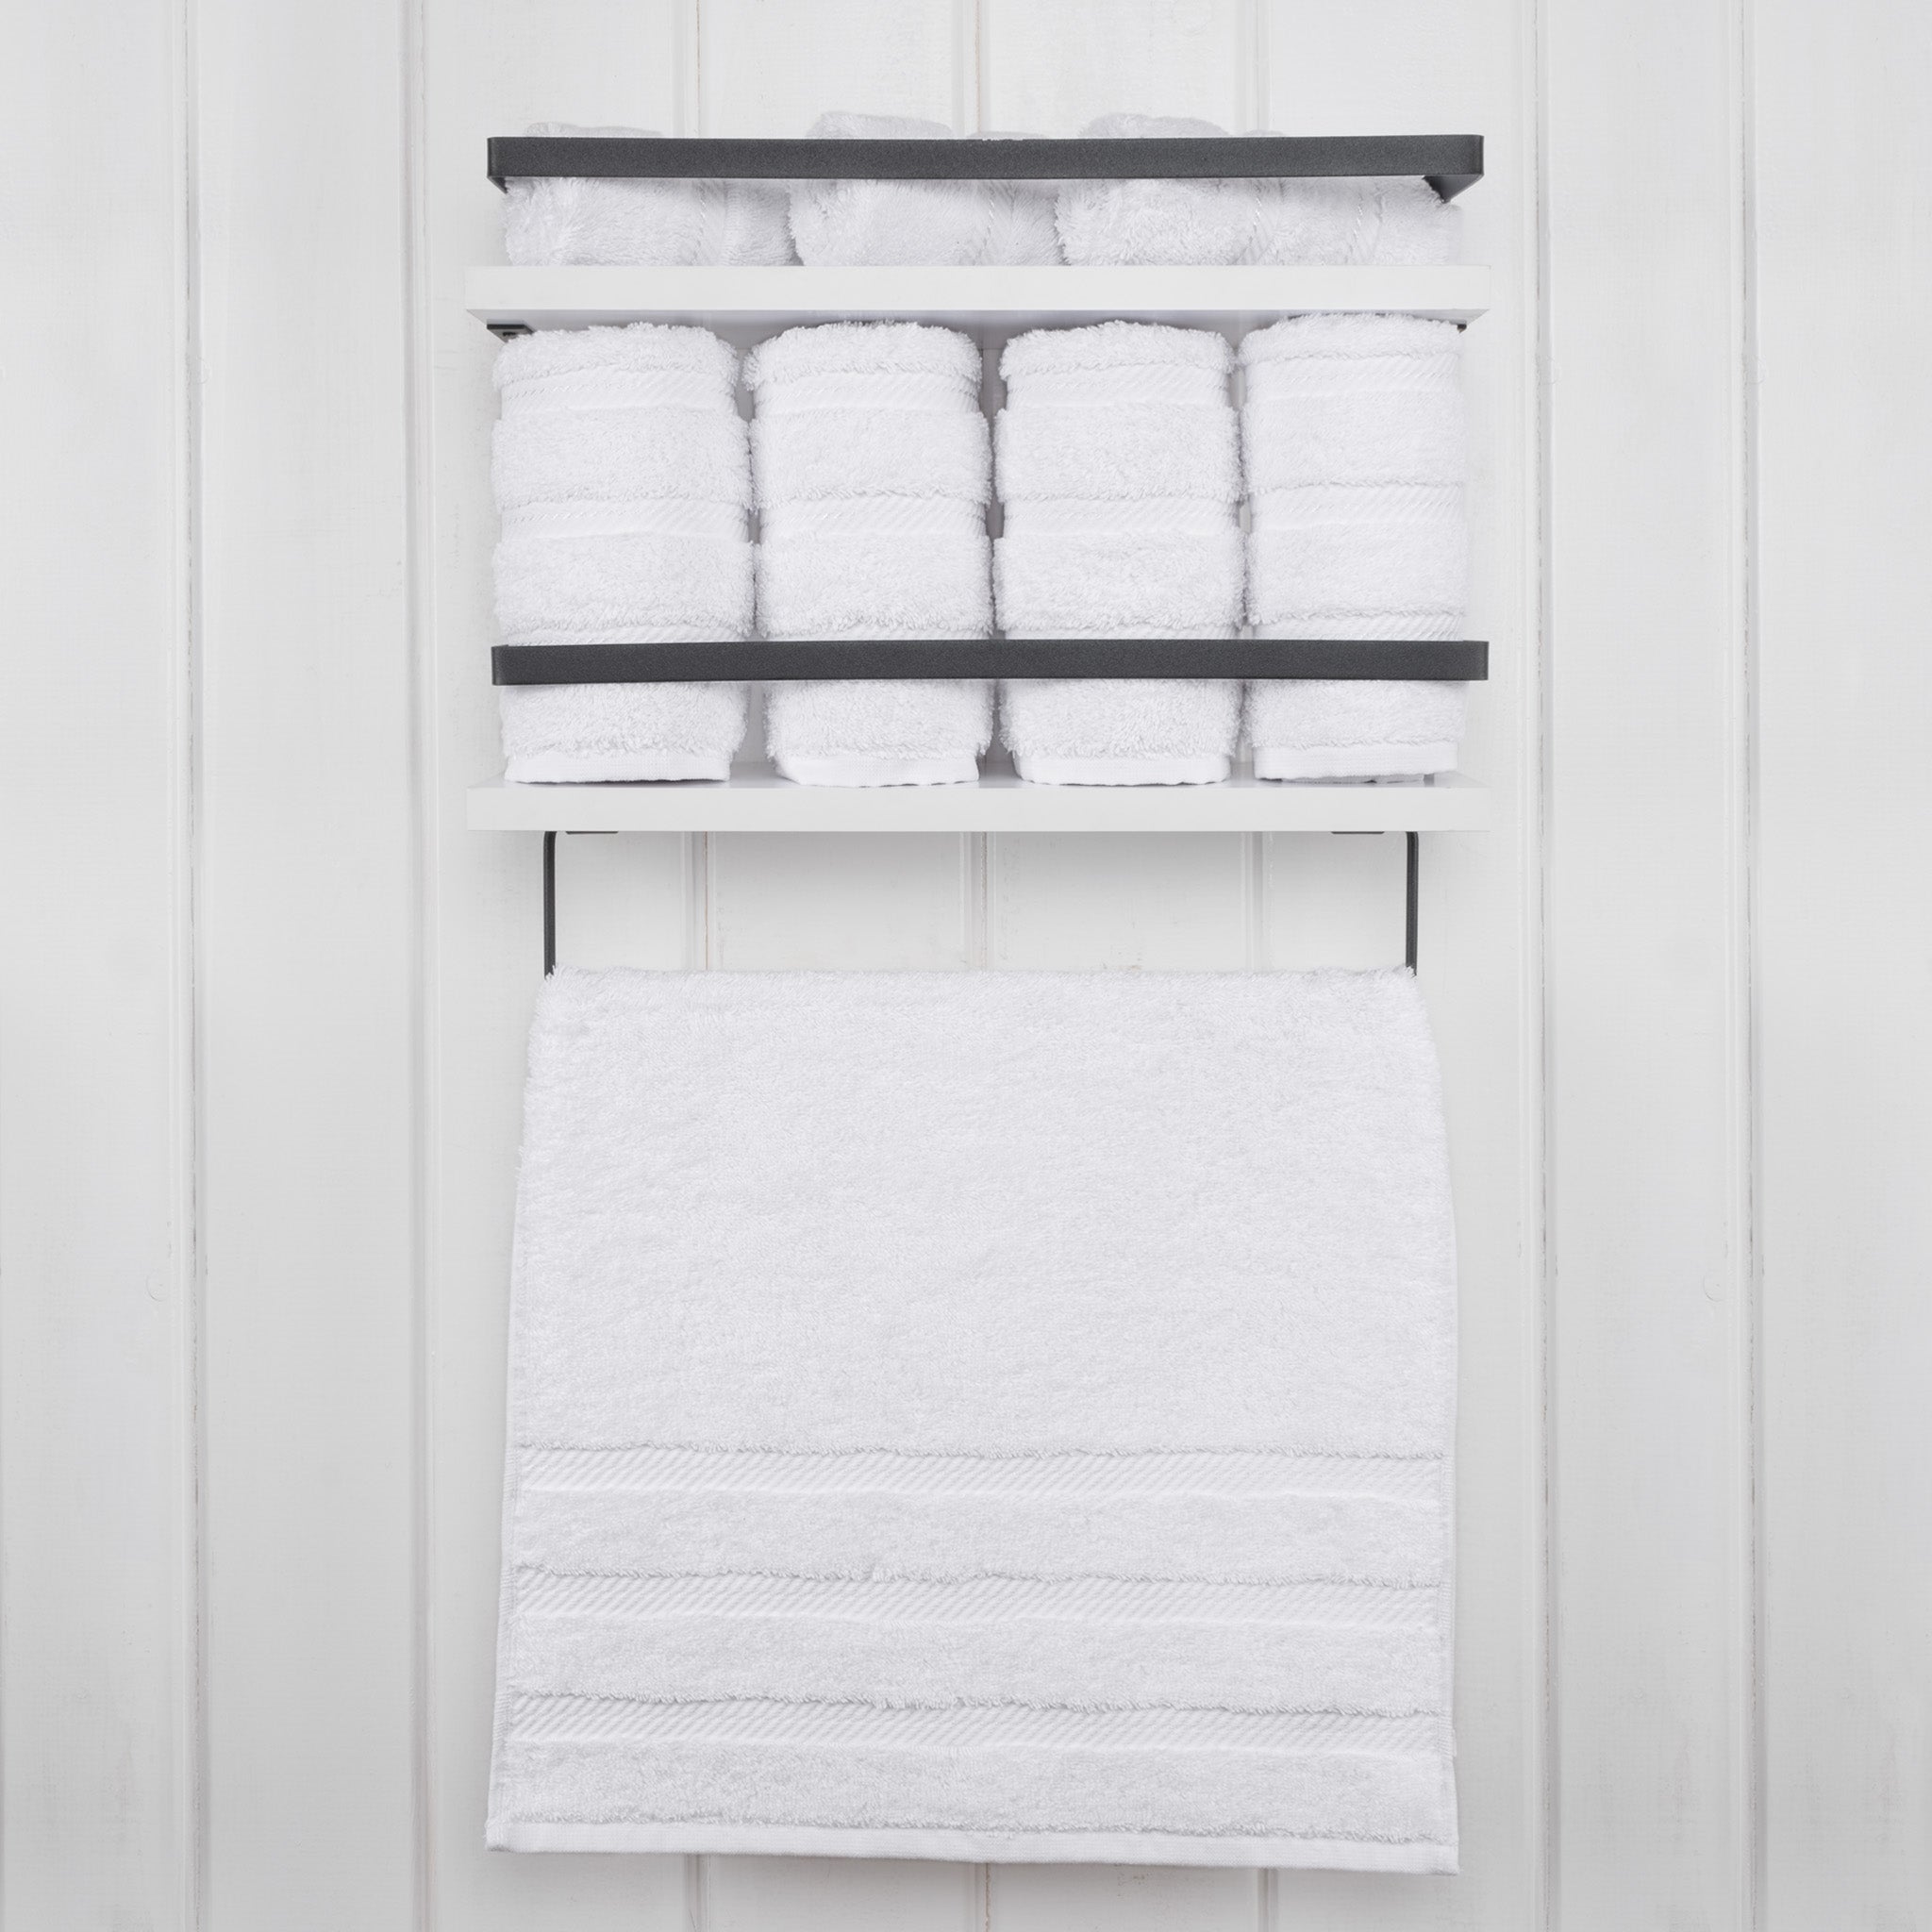 Kitchen Towel Sets | All Cotton and Linen Black & White / Set of 4